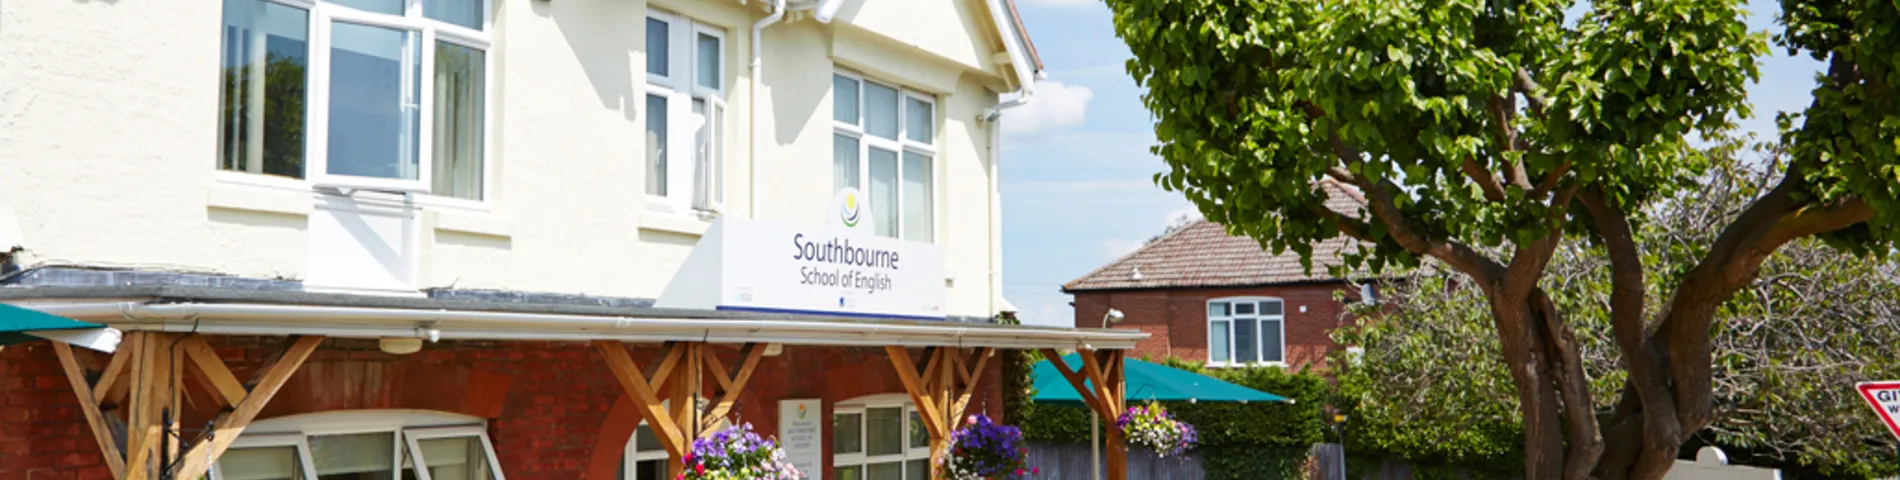 Southbourne School of English immagine 1